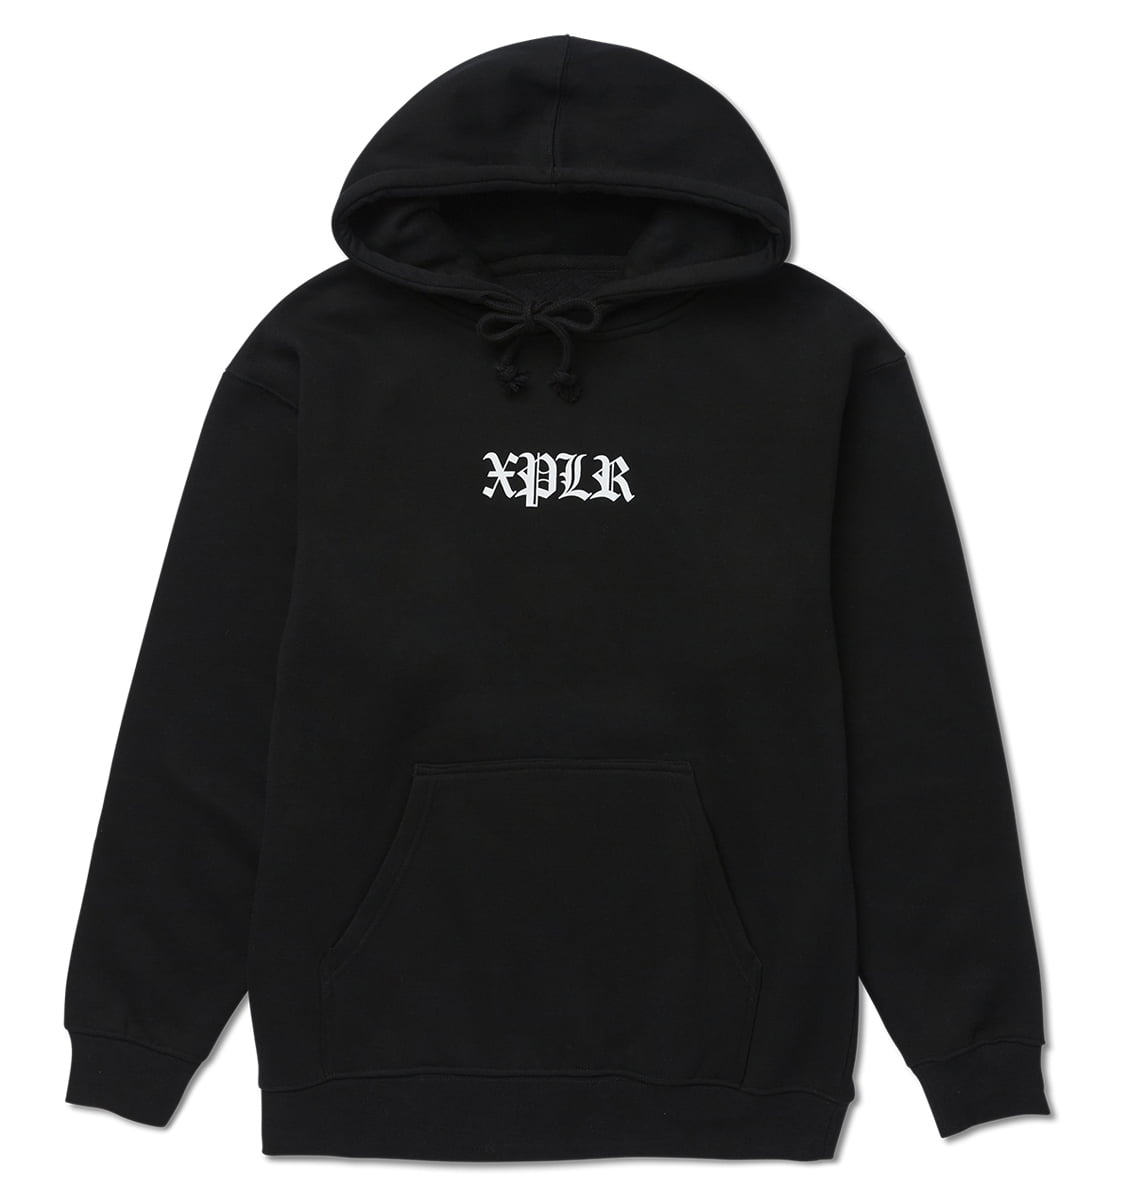 XPLR Sam and Colby Chainlink Merch Hooded Sweatshirt Unisex Casual ...